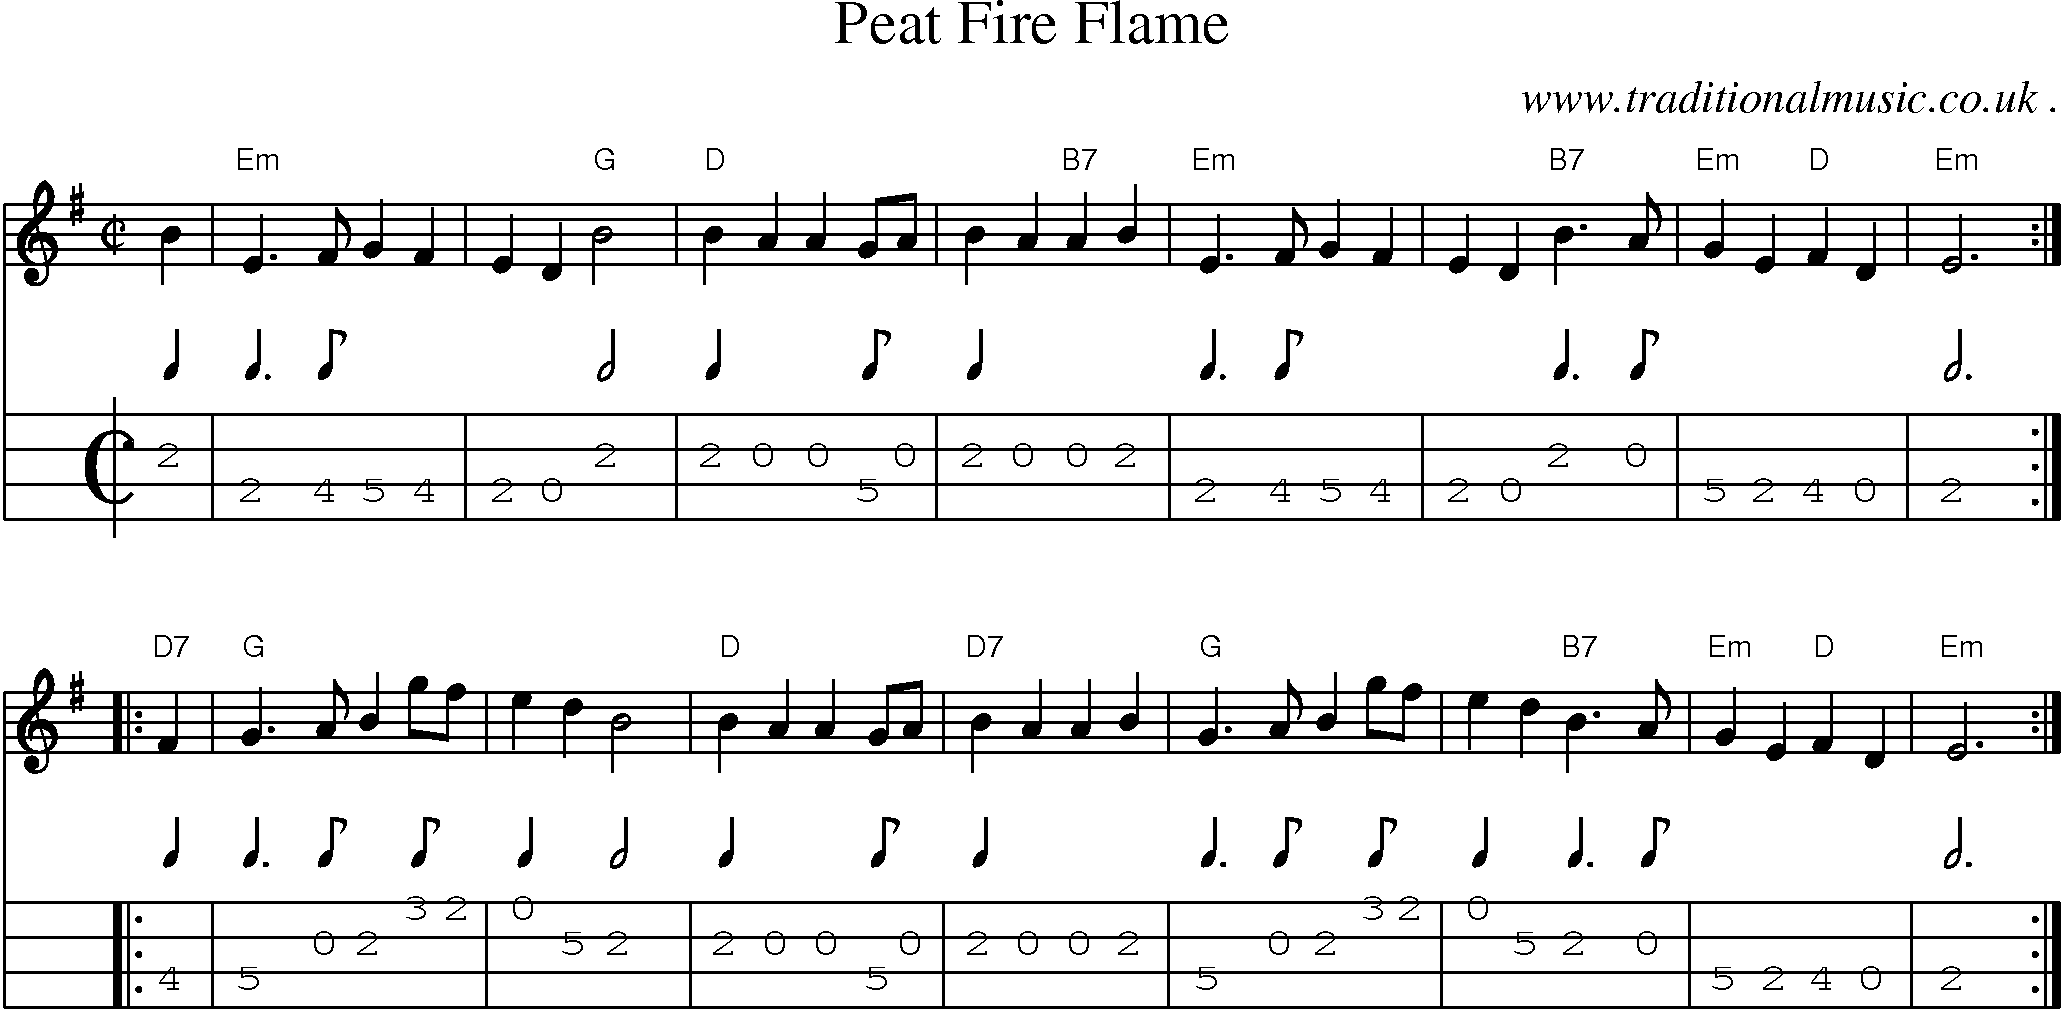 Sheet-music  score, Chords and Mandolin Tabs for Peat Fire Flame